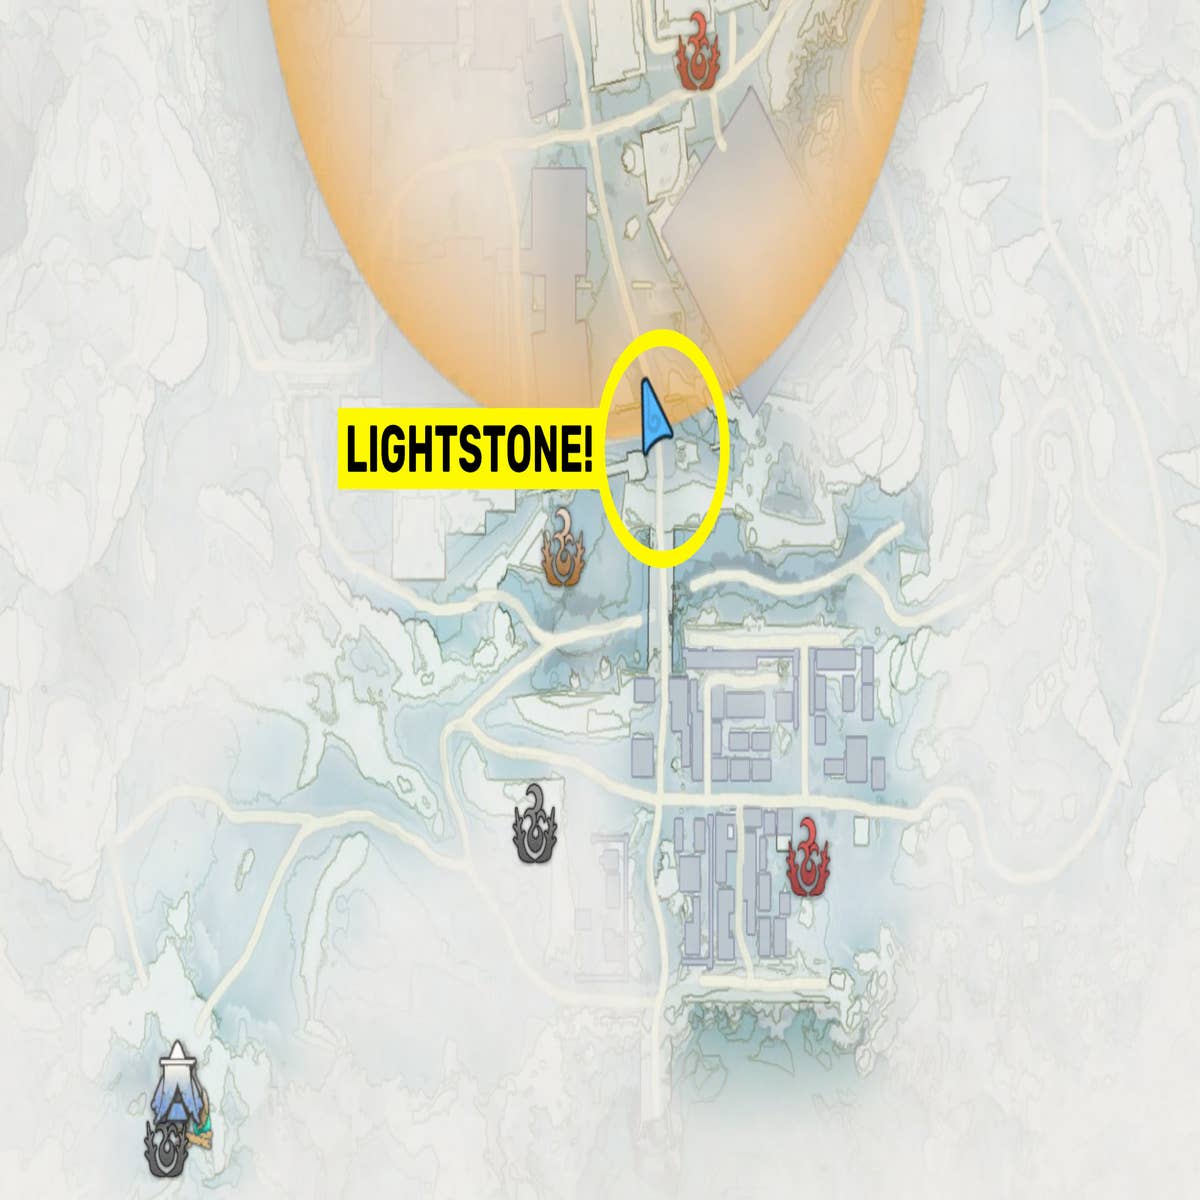 Wild Hearts: Where to find Lightstone